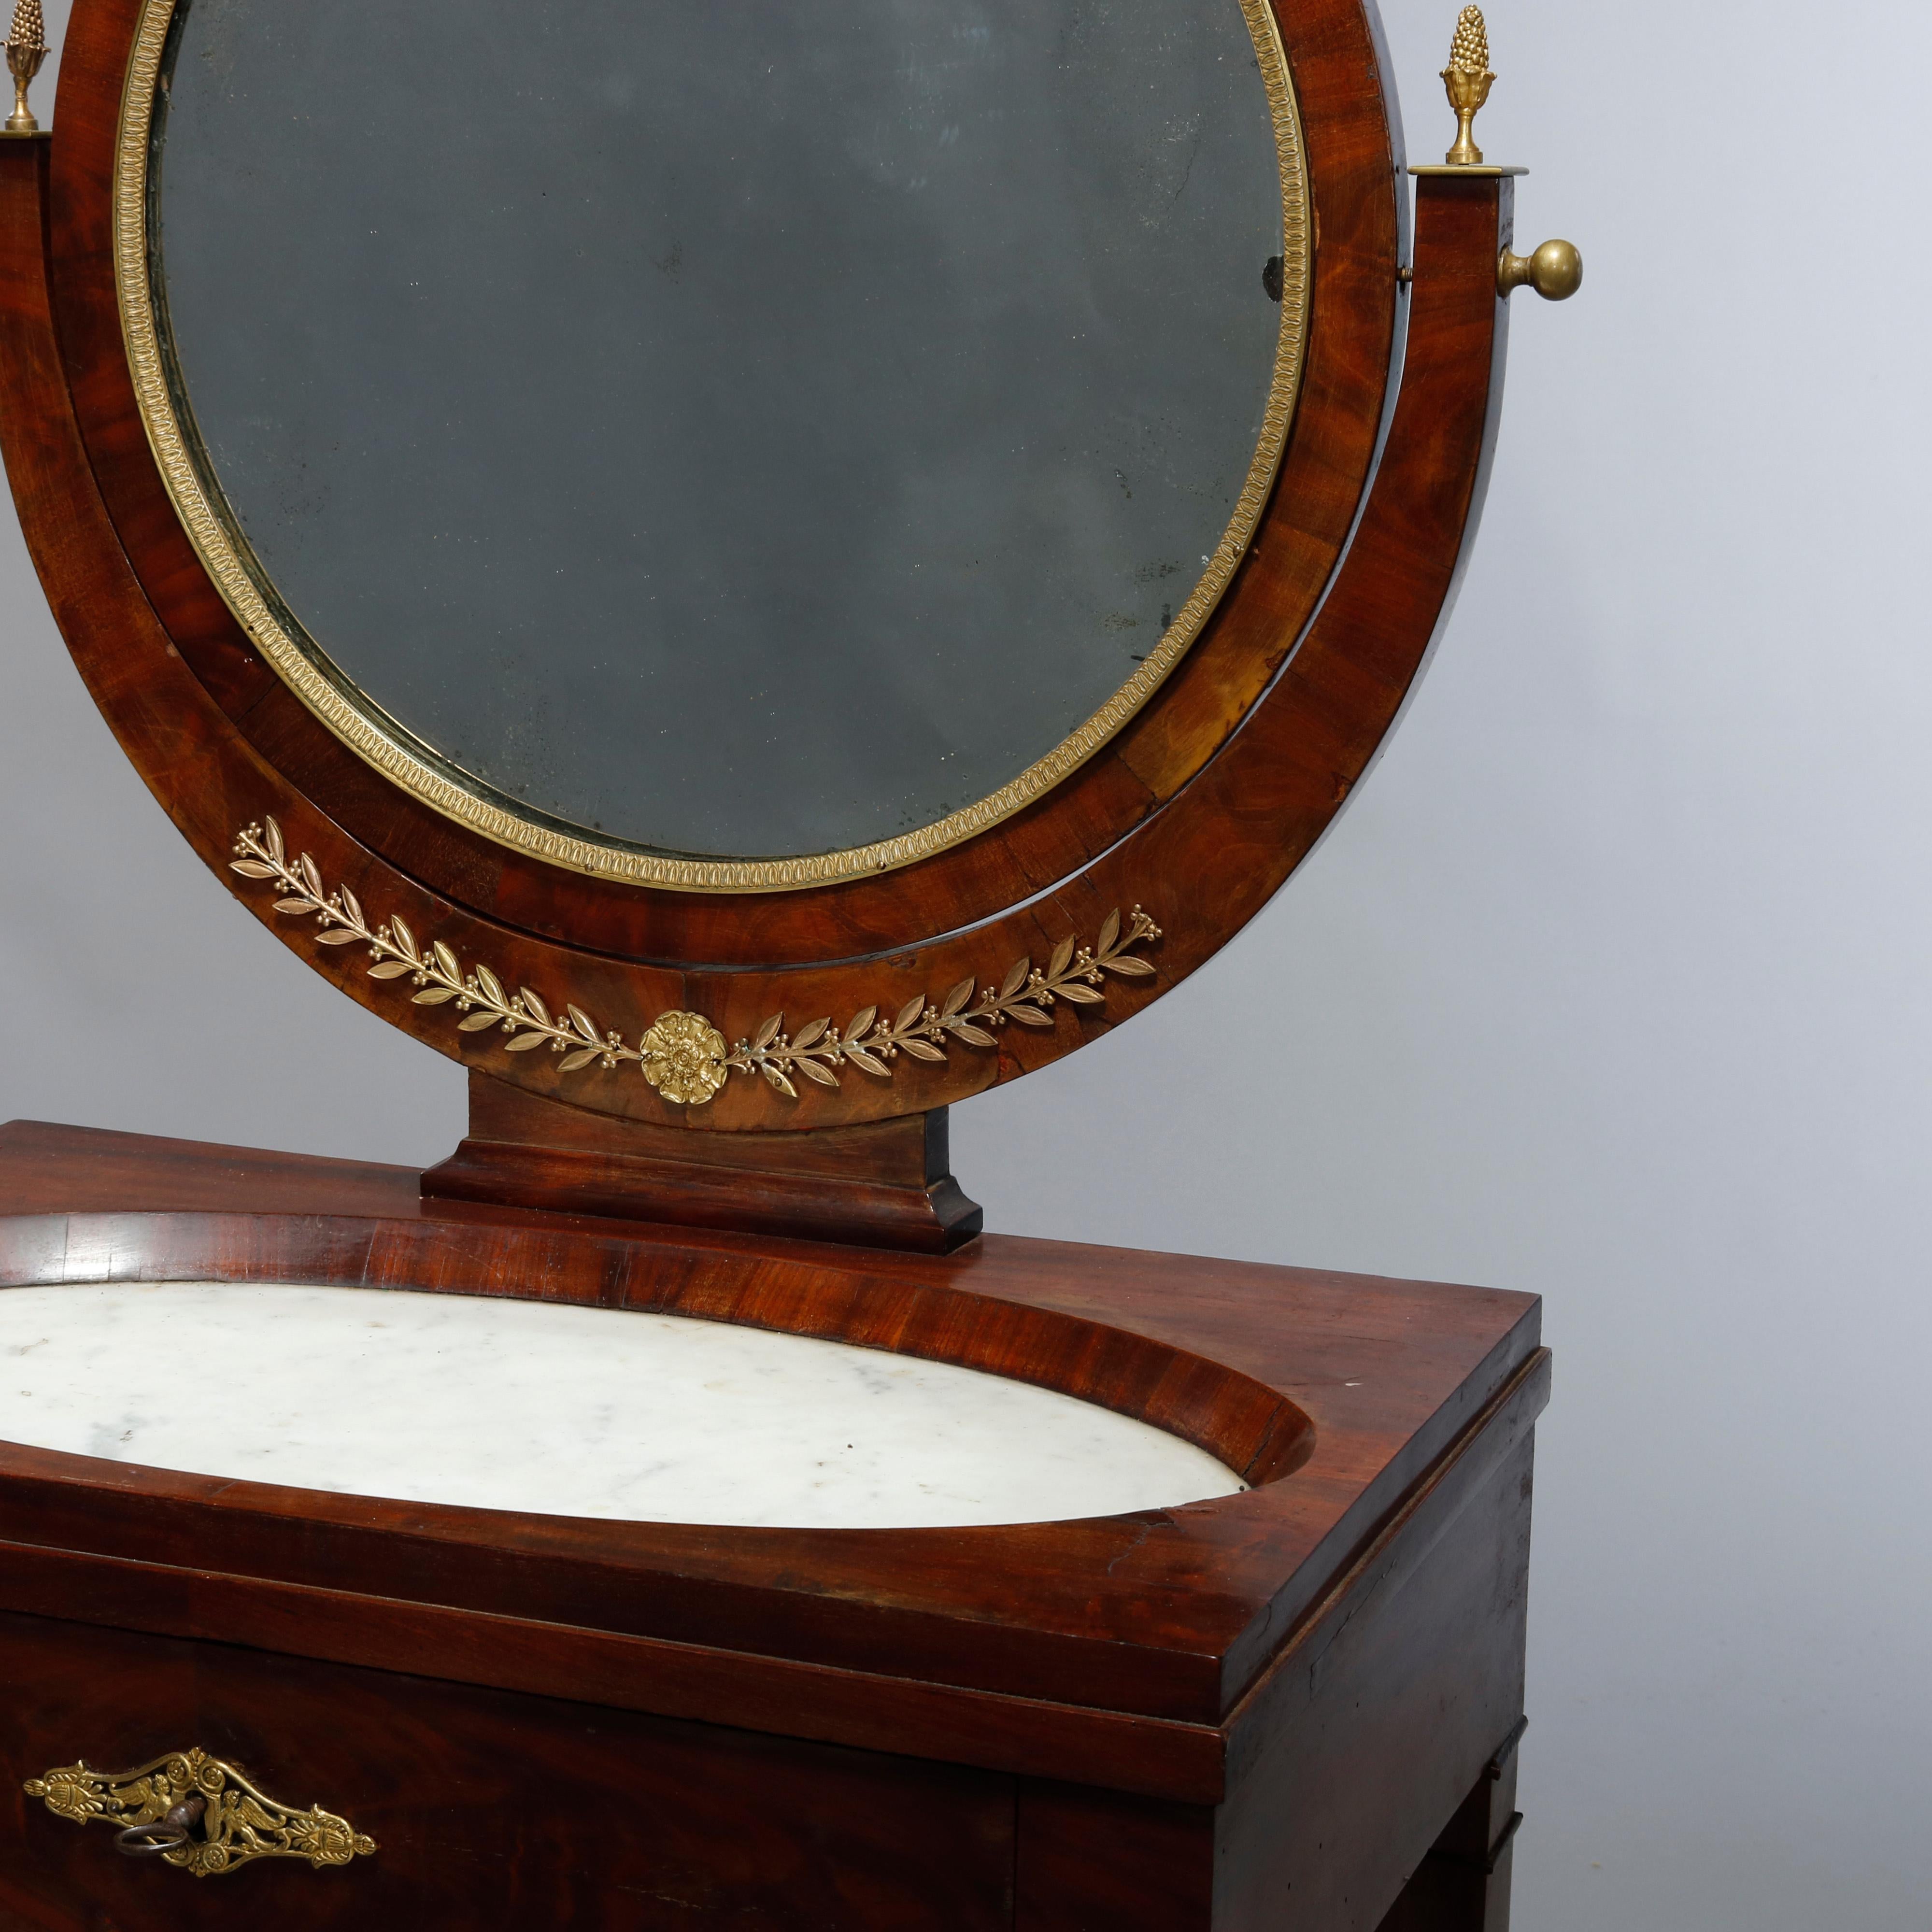 Carved Antique French Empire Flame Mahogany & Ormolu Marble-Top Dressing Table, c 1810